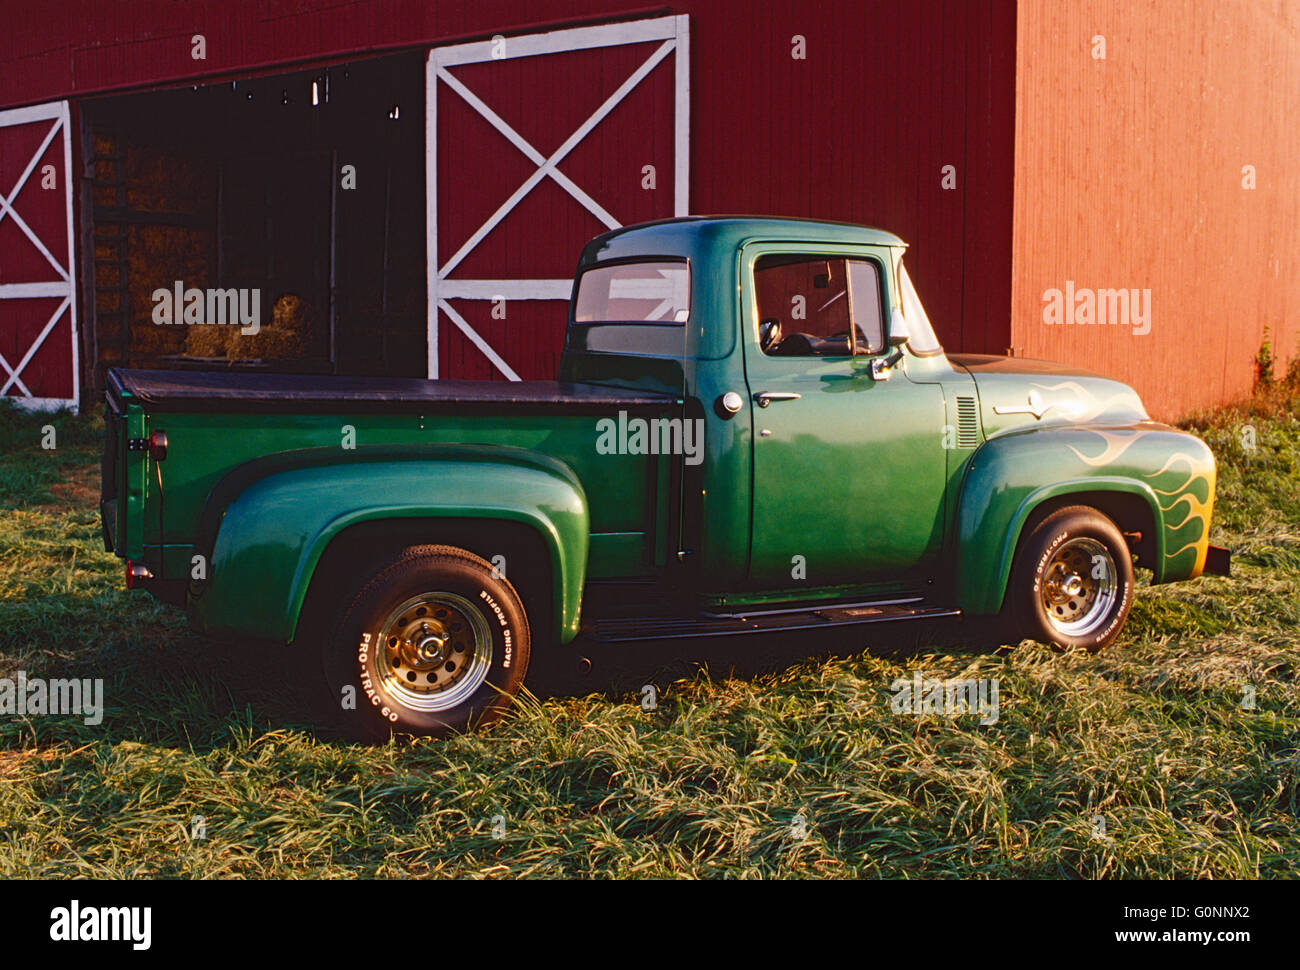 Green & Gold Antique Ford pick up truck ; New York, USA Banque D'Images